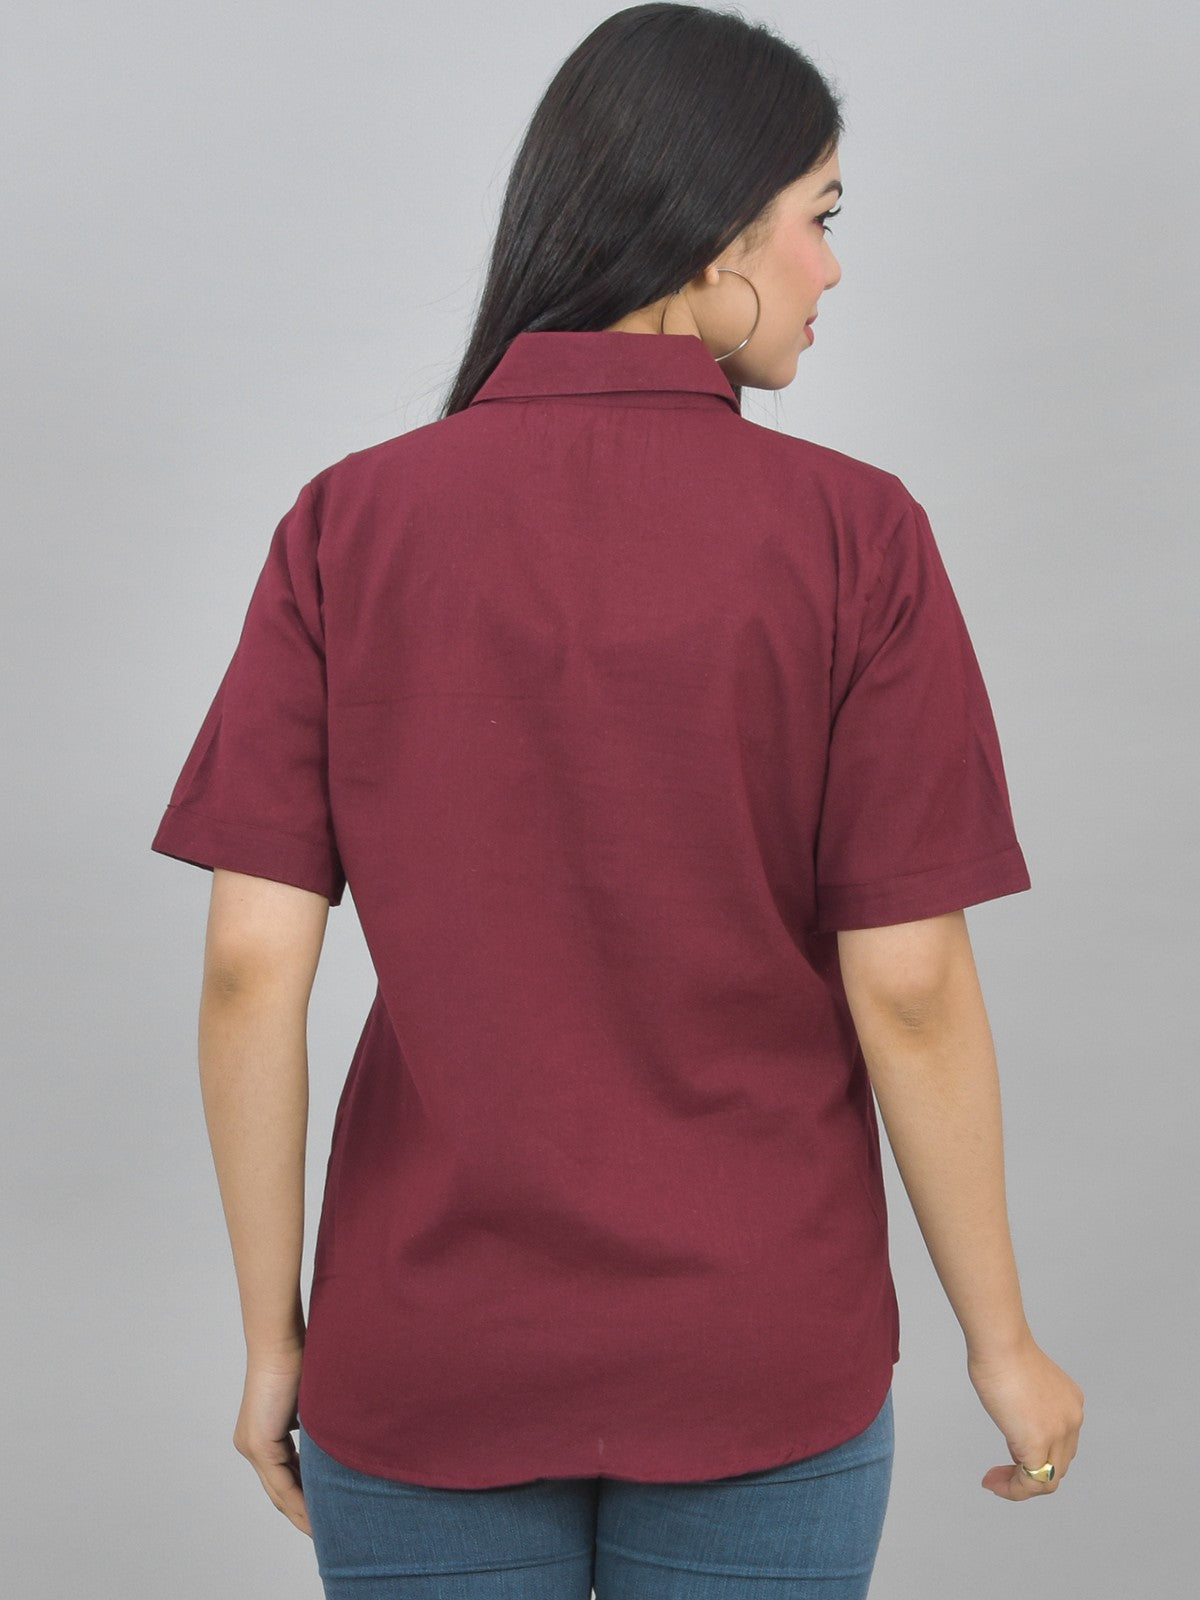 Pack Of 2 Womens Solid Mustard And Wine Half Sleeve Cotton Shirts Combo